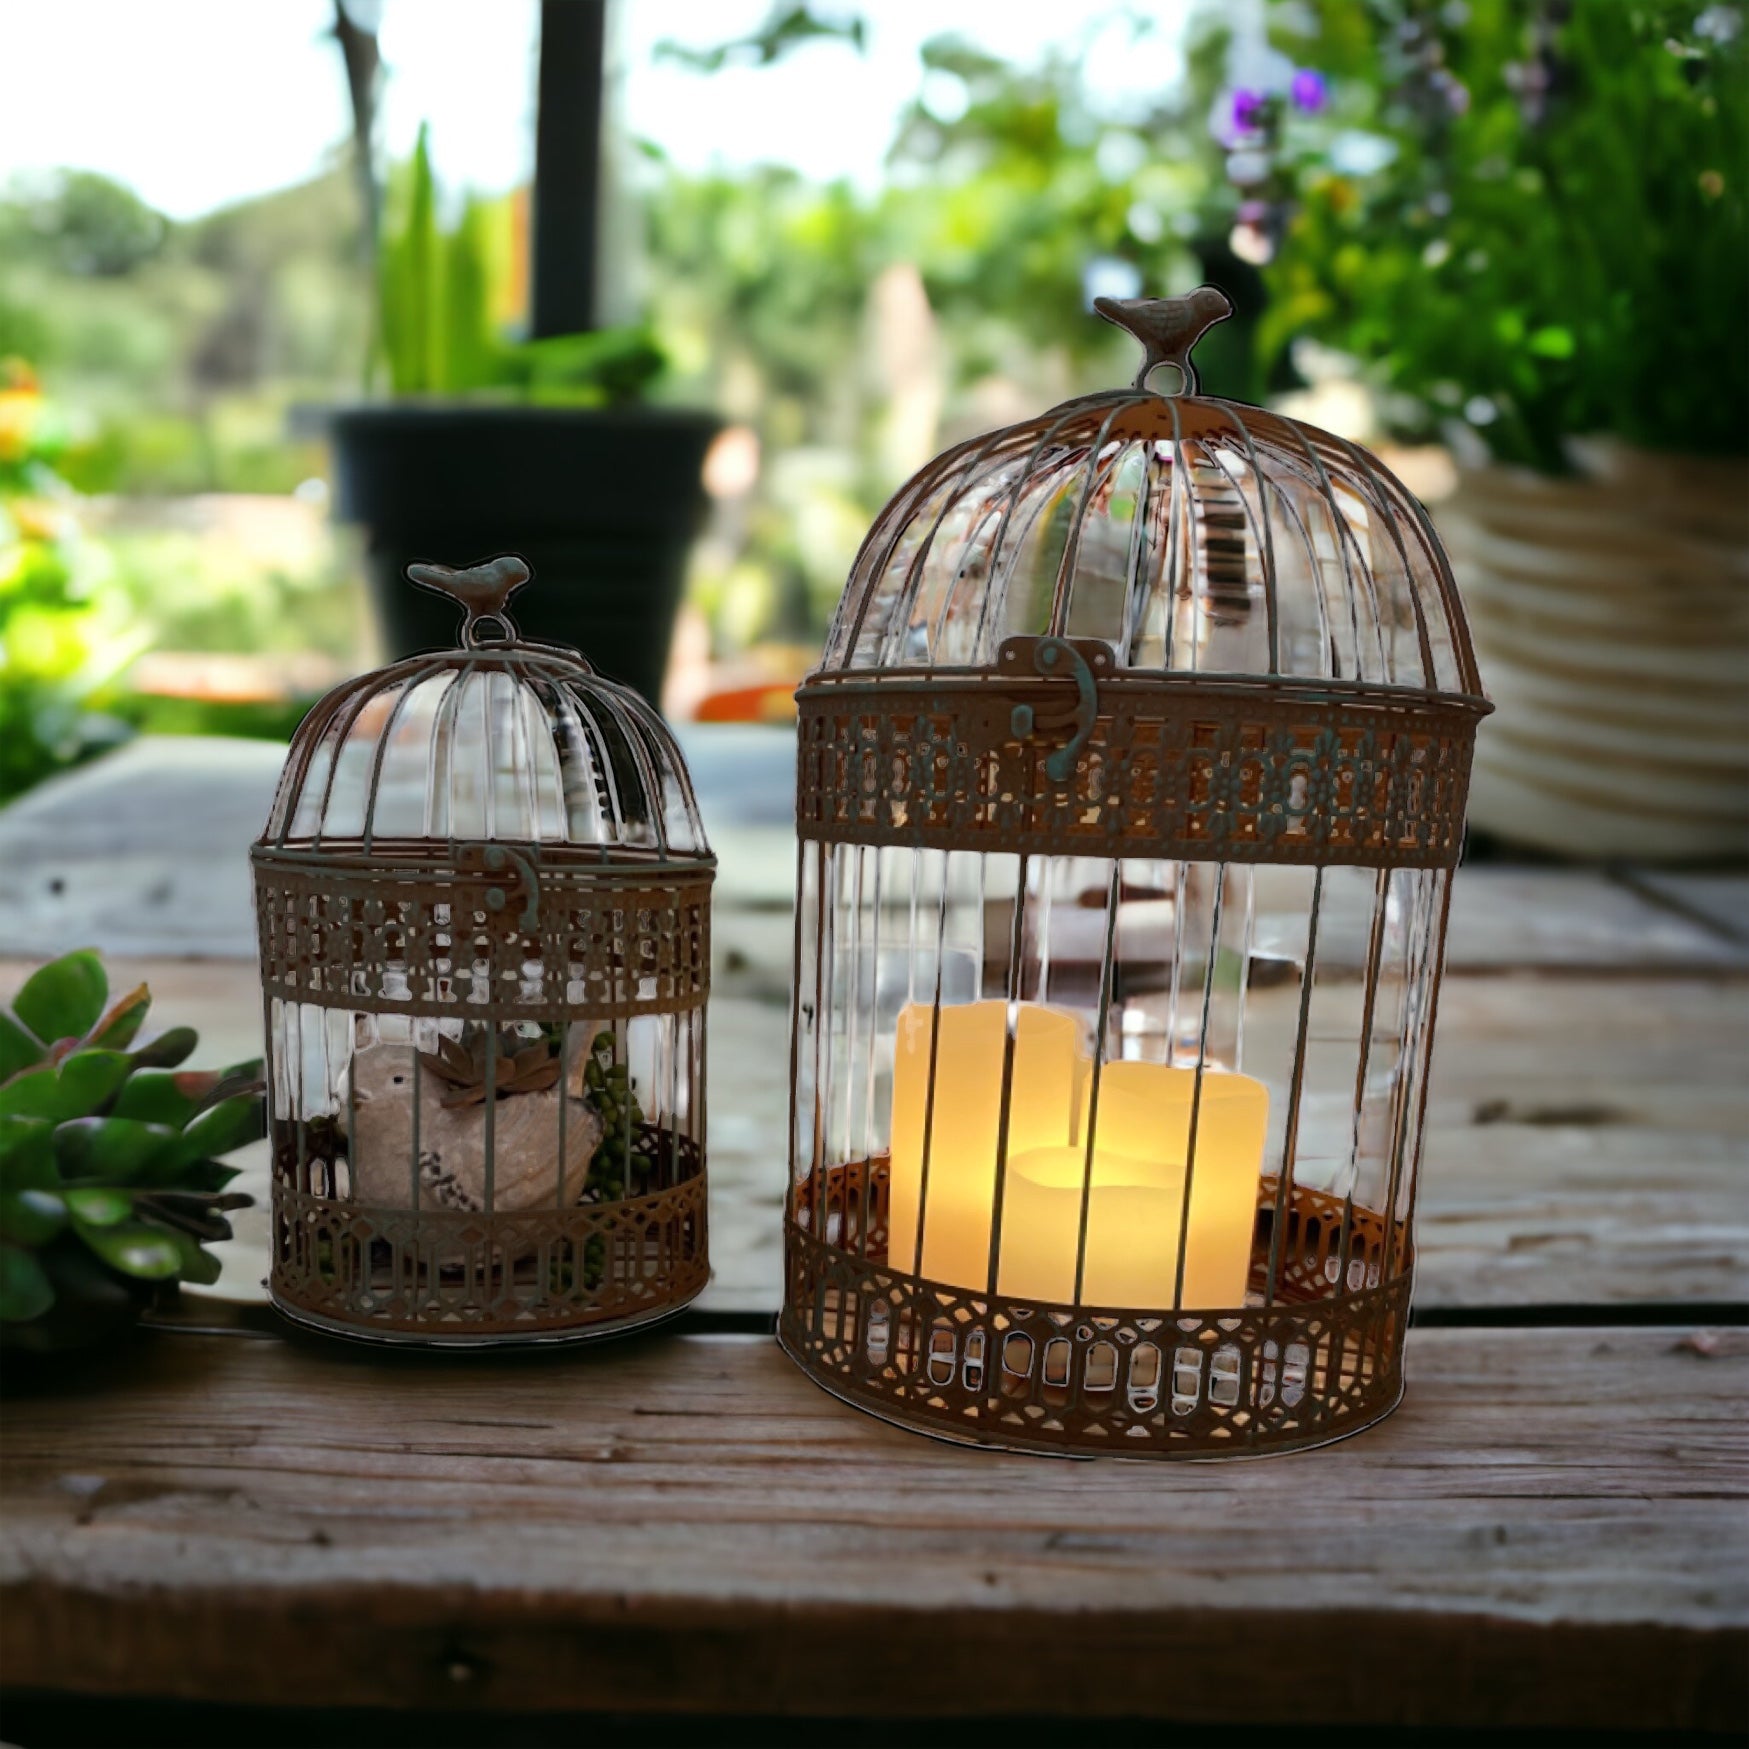 Candle Holder Garden Bird Cage Set of 2 - The Renmy Store Homewares & Gifts 